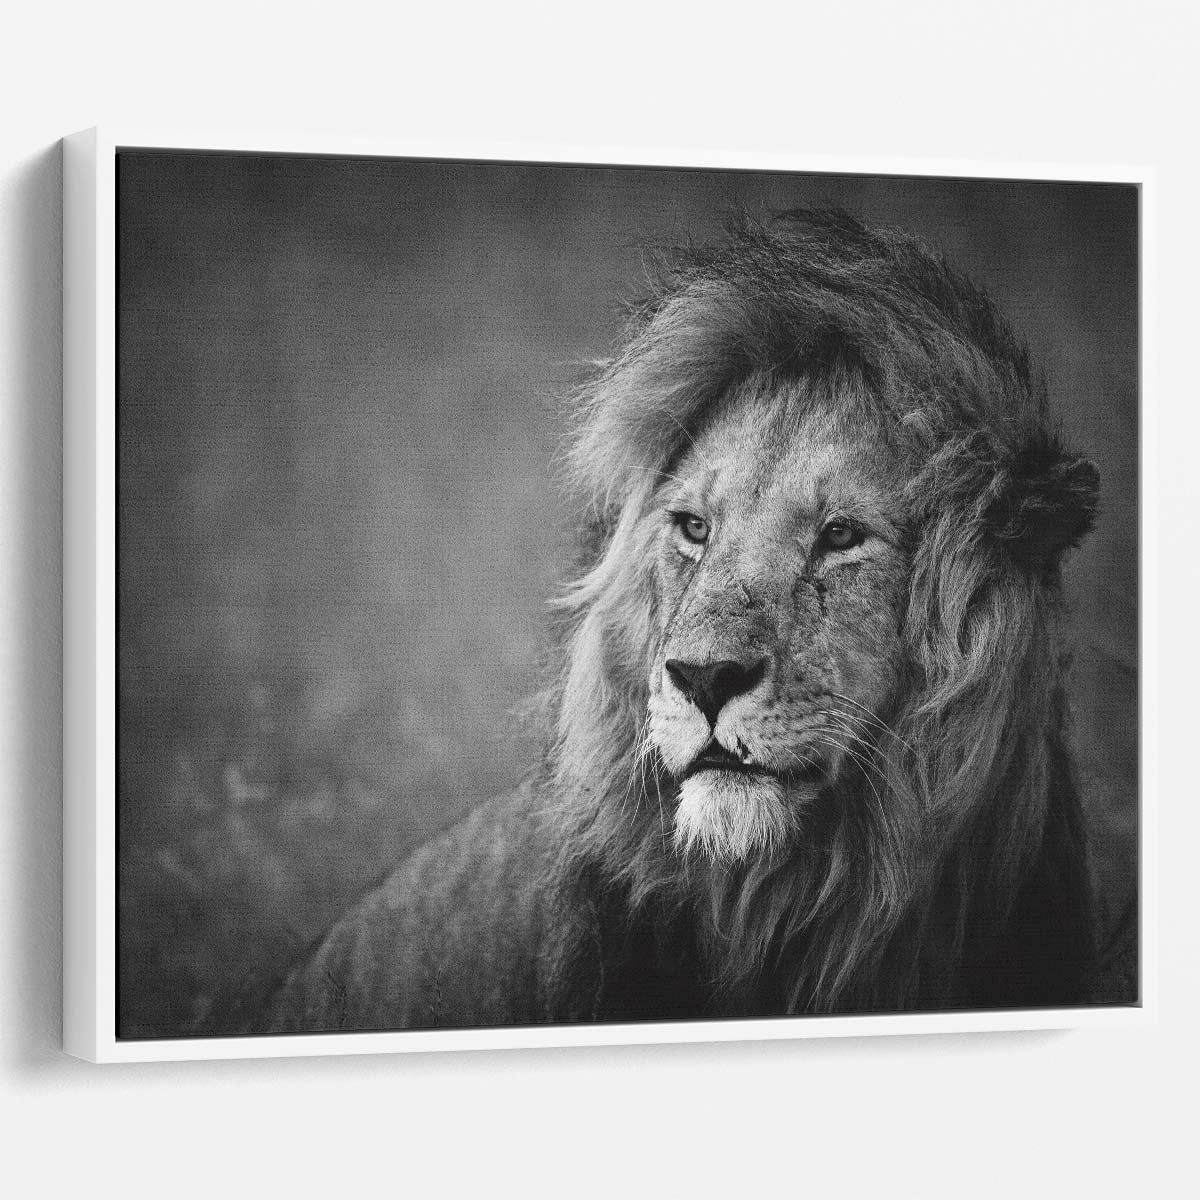 Majestic WindSwept Lion Monochrome Wall Art by Luxuriance Designs. Made in USA.